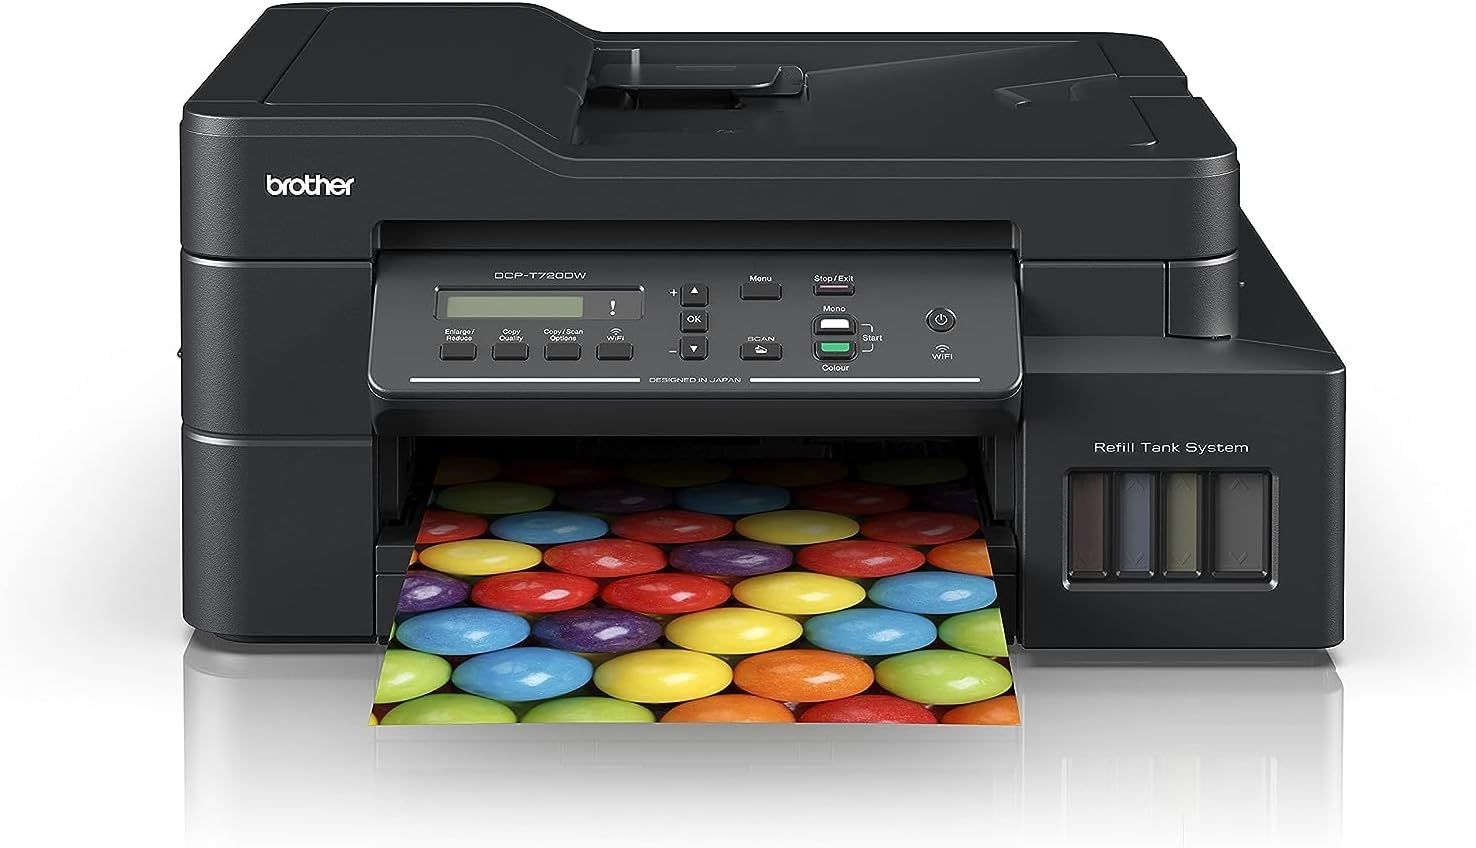 Цветной бразер. Brother INKBENEFIT Plus DCP-t720dw. МФУ brother DCP-t820w. Принтер brother DCP-t820dw. Epson l3100.